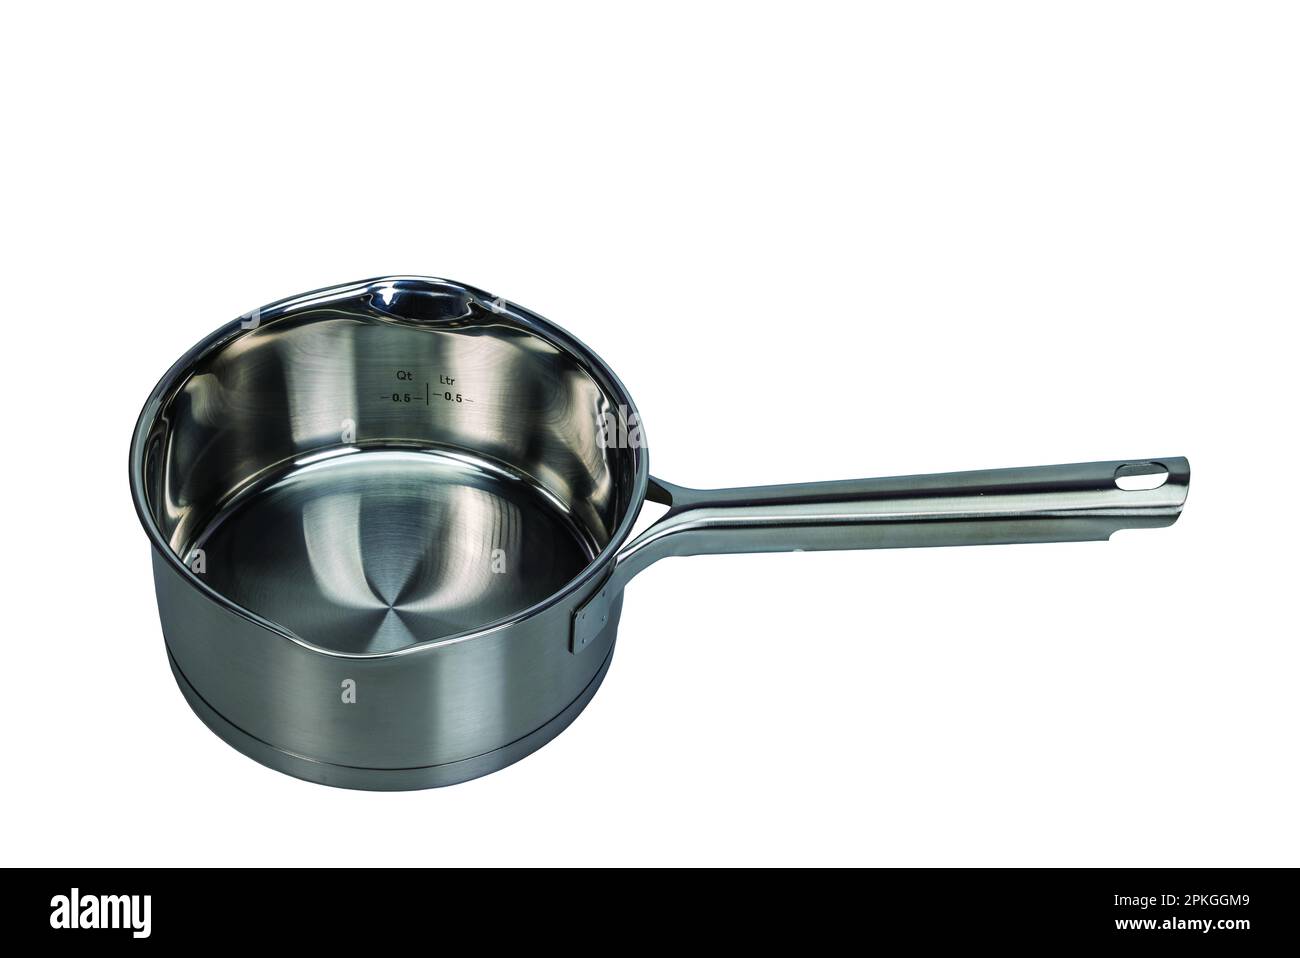 Close-up view of 0.5 liter stainless steel cooking pot isolated on white background. Sweden. Stock Photo